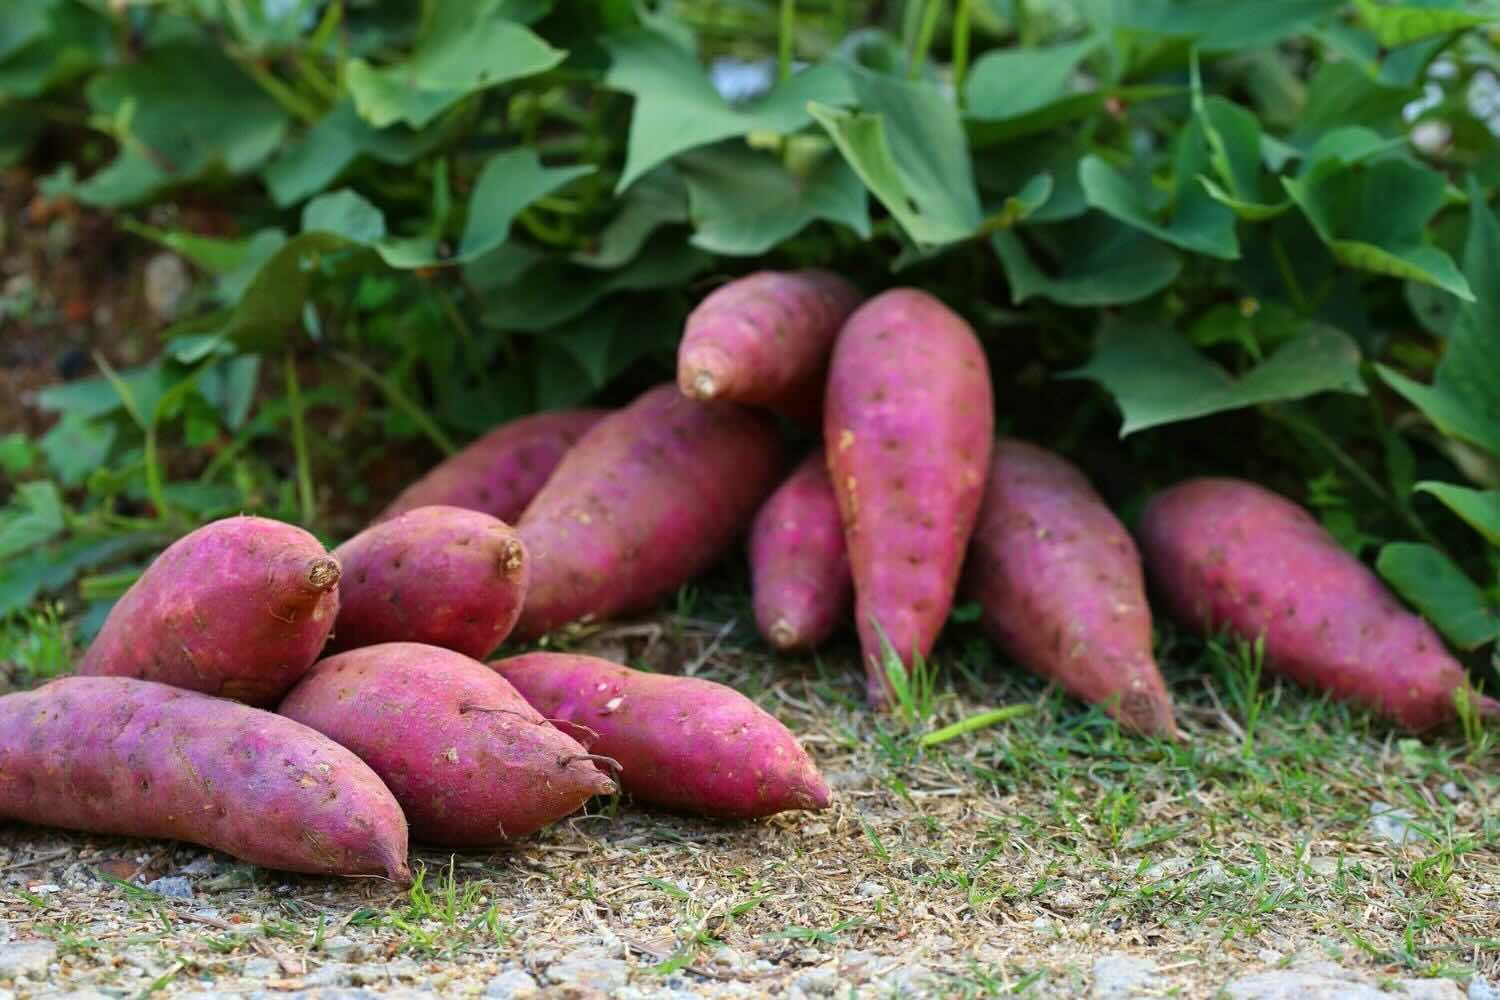 How To Grow Sweet Potatoes So You Have Greenery In The Summer